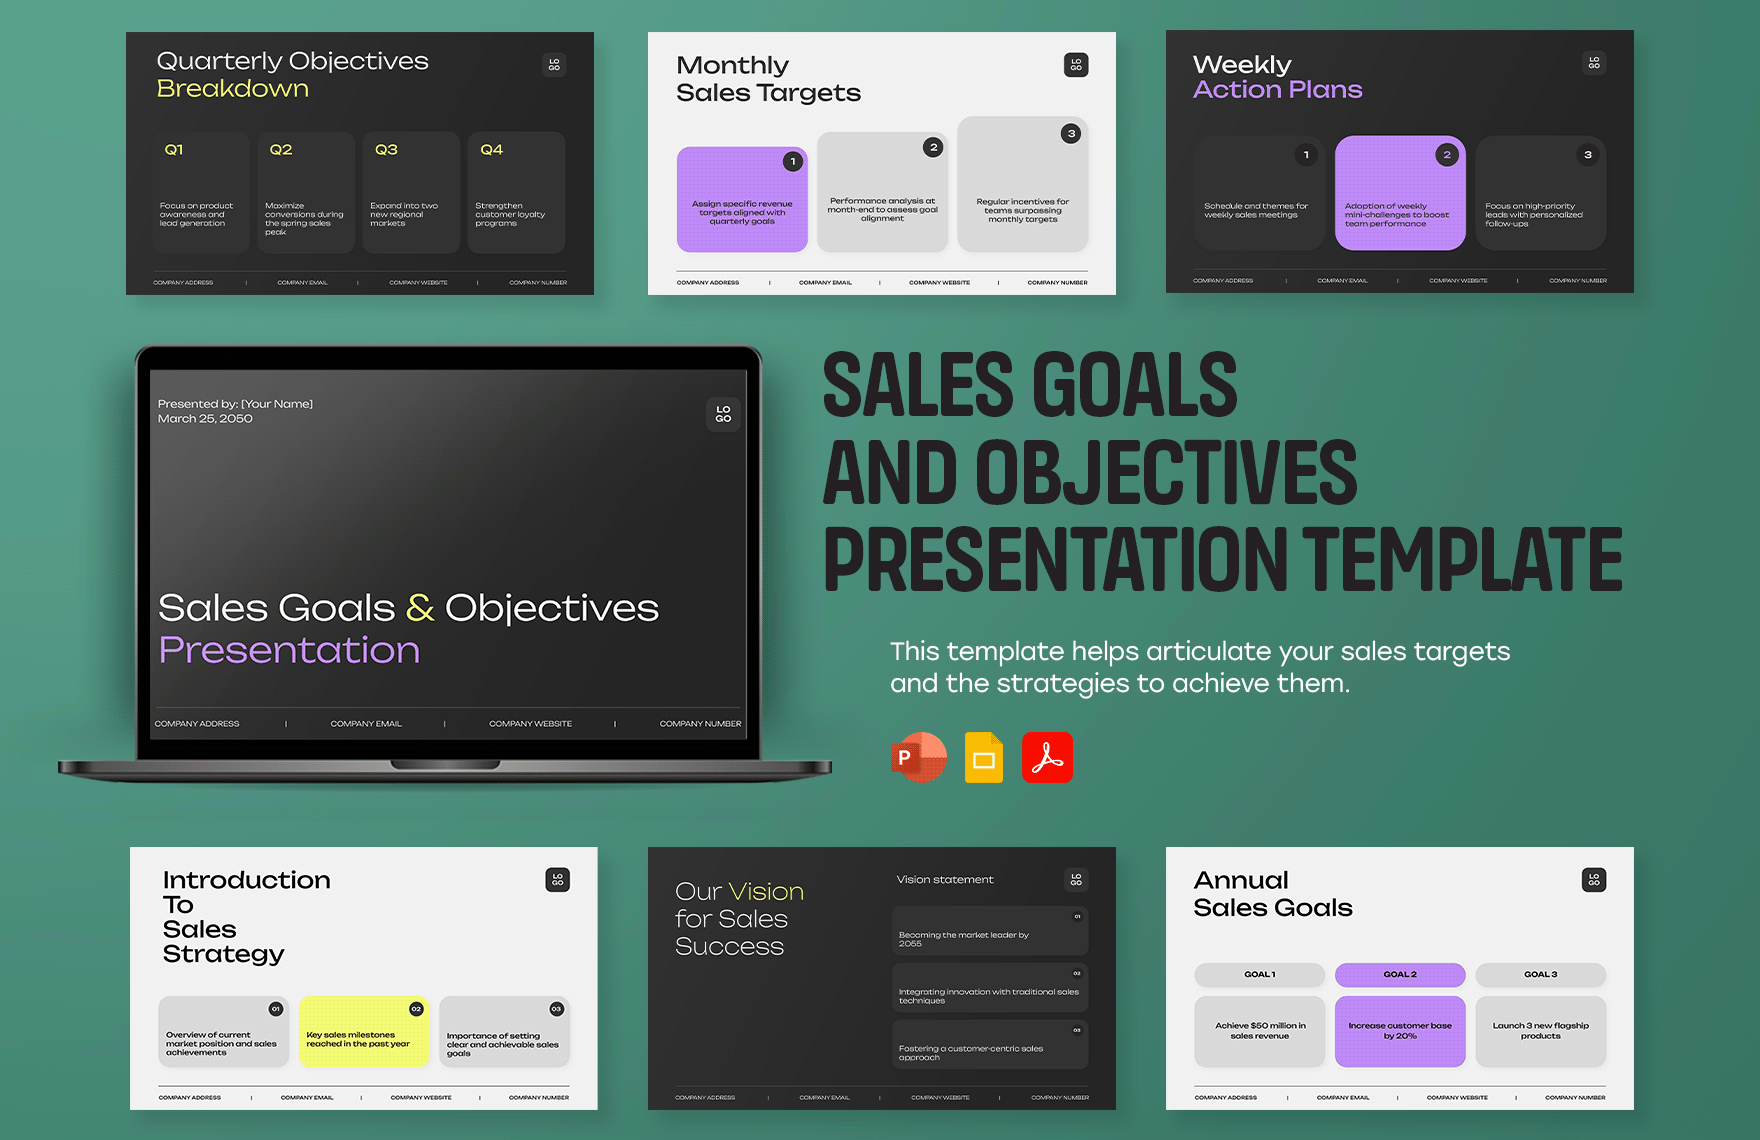 Sales Goals and Objectives Presentation Template